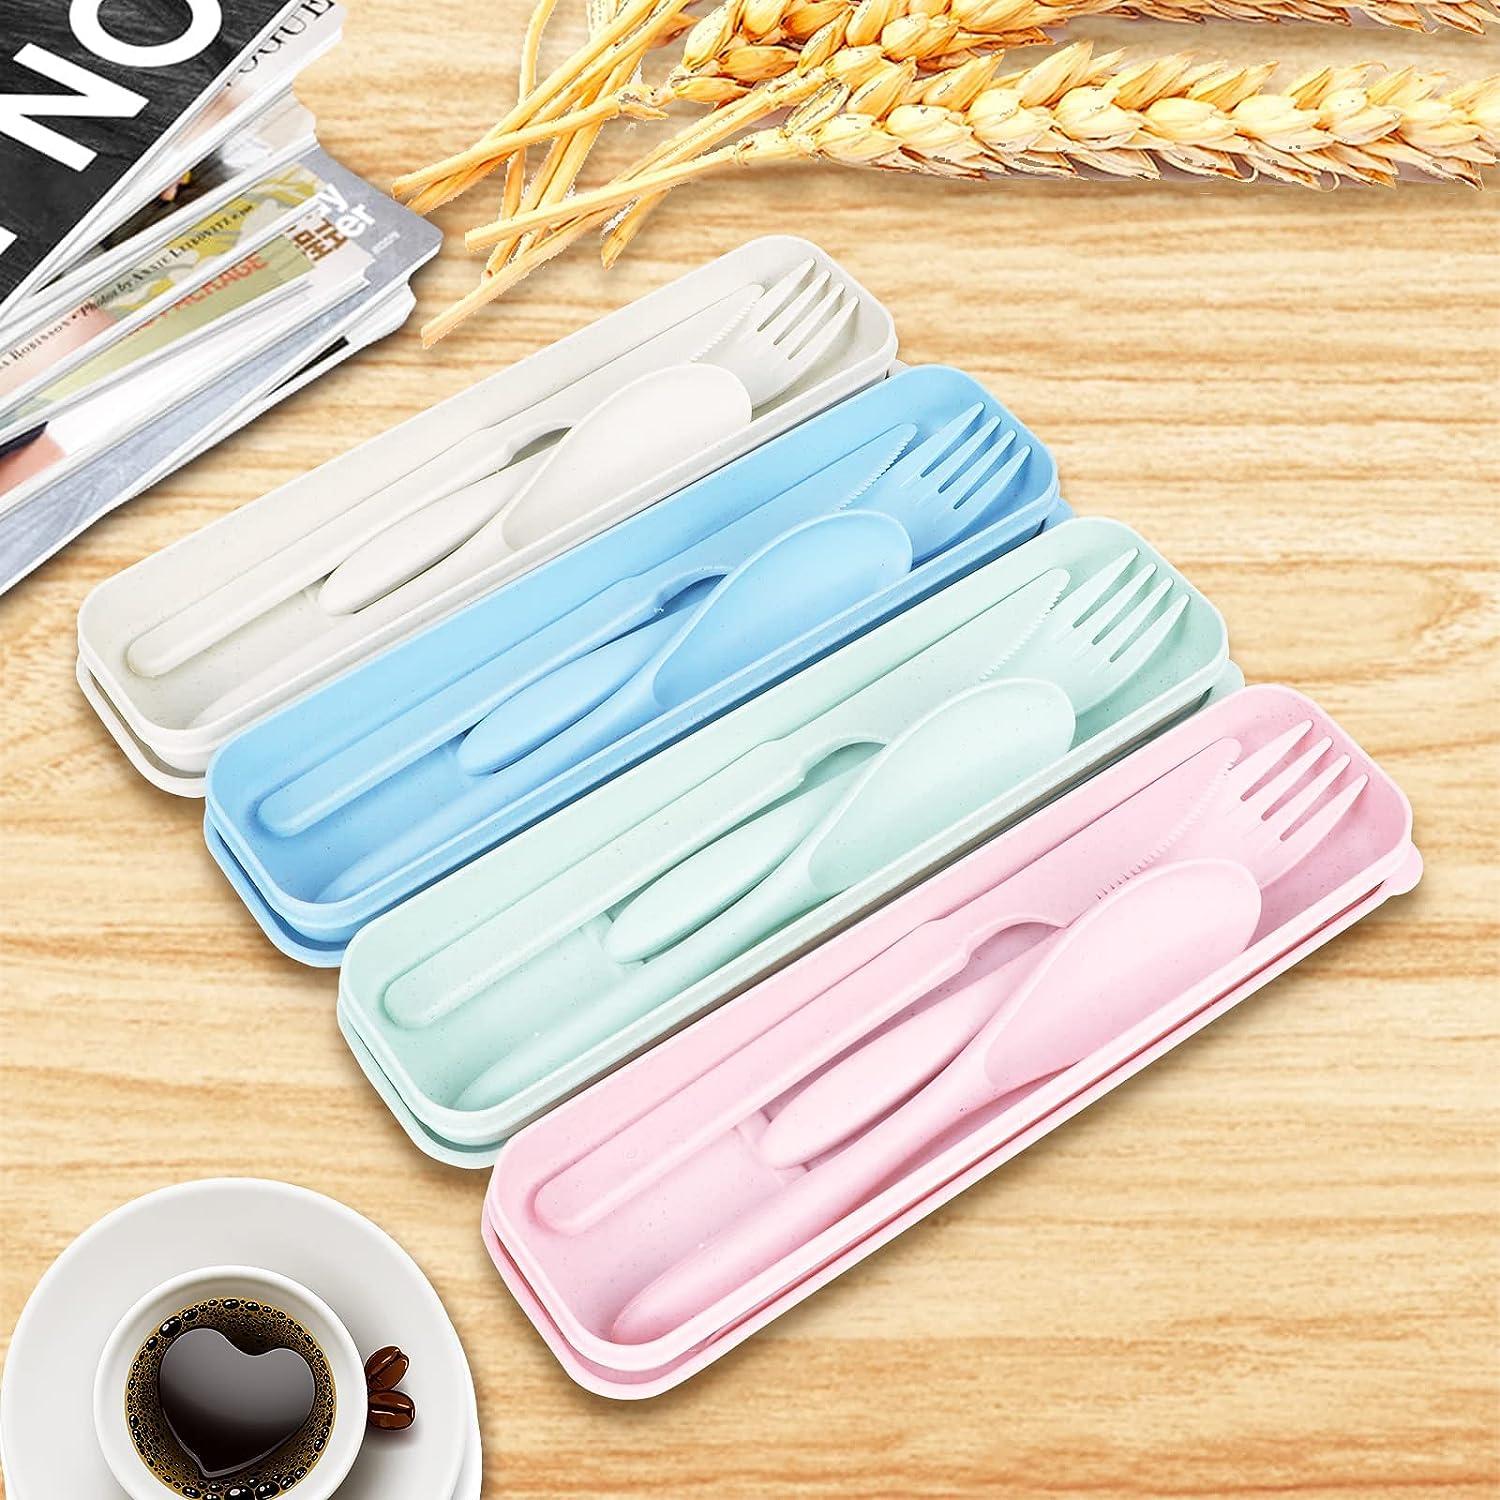 Reusable Travel Utensils Set With Case Box Wheat Straw Portable Knife Fork  Spoons Set Tableware Eco-Friendly BPA Free Cutlery